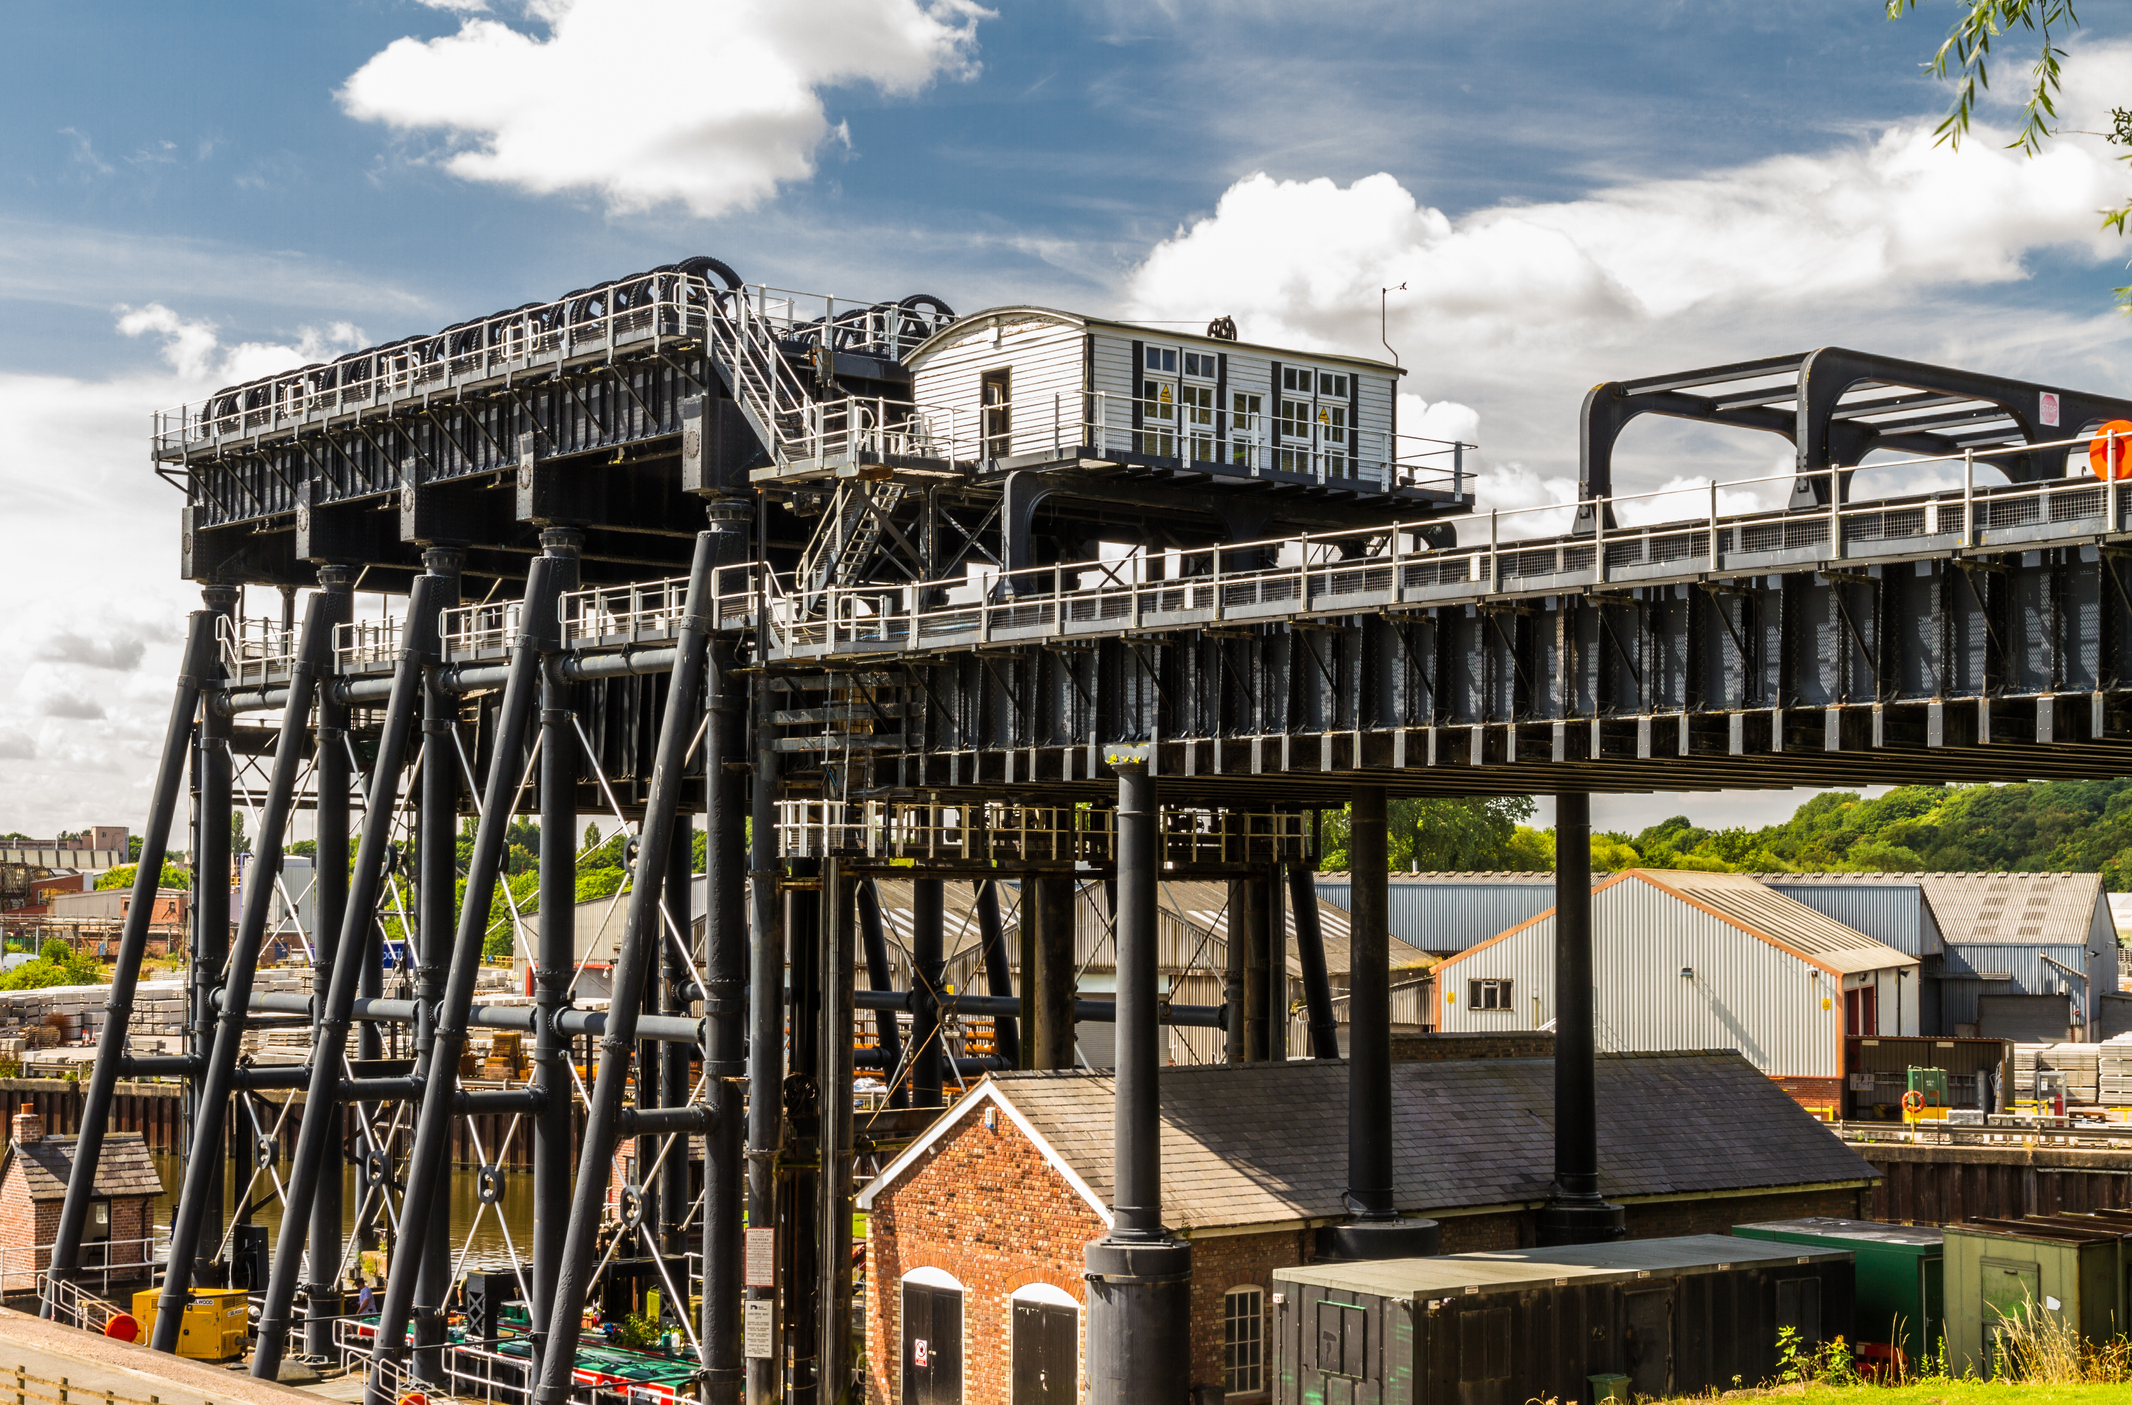 Full view of the Anderton Boat Lift from the Trent & Mersey side